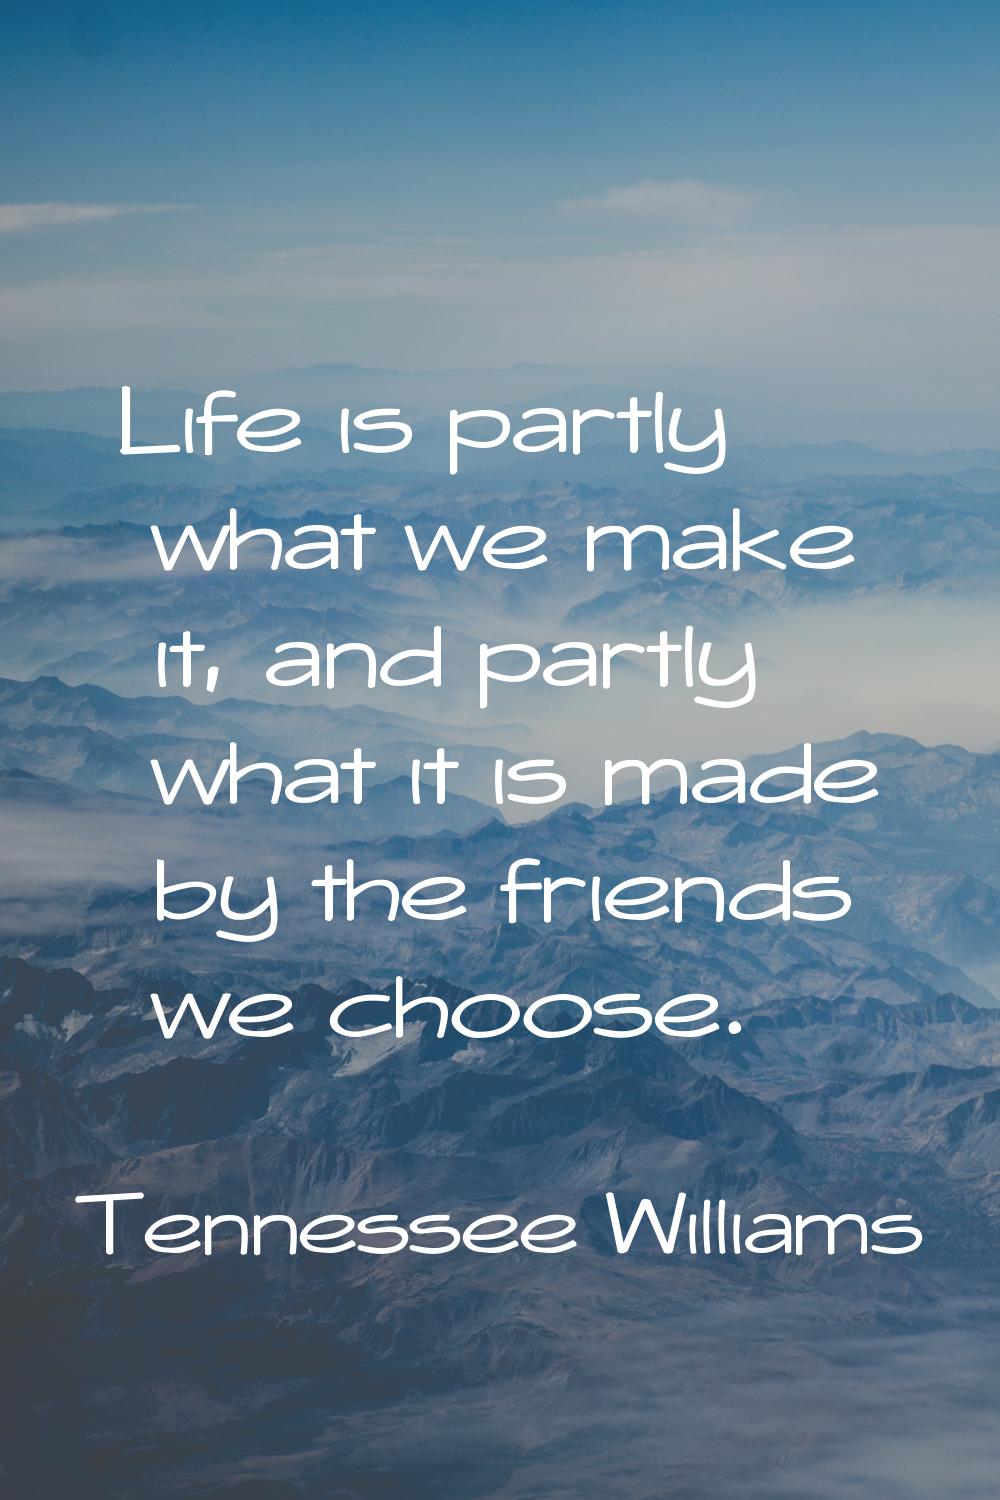 Life is partly what we make it, and partly what it is made by the friends we choose.